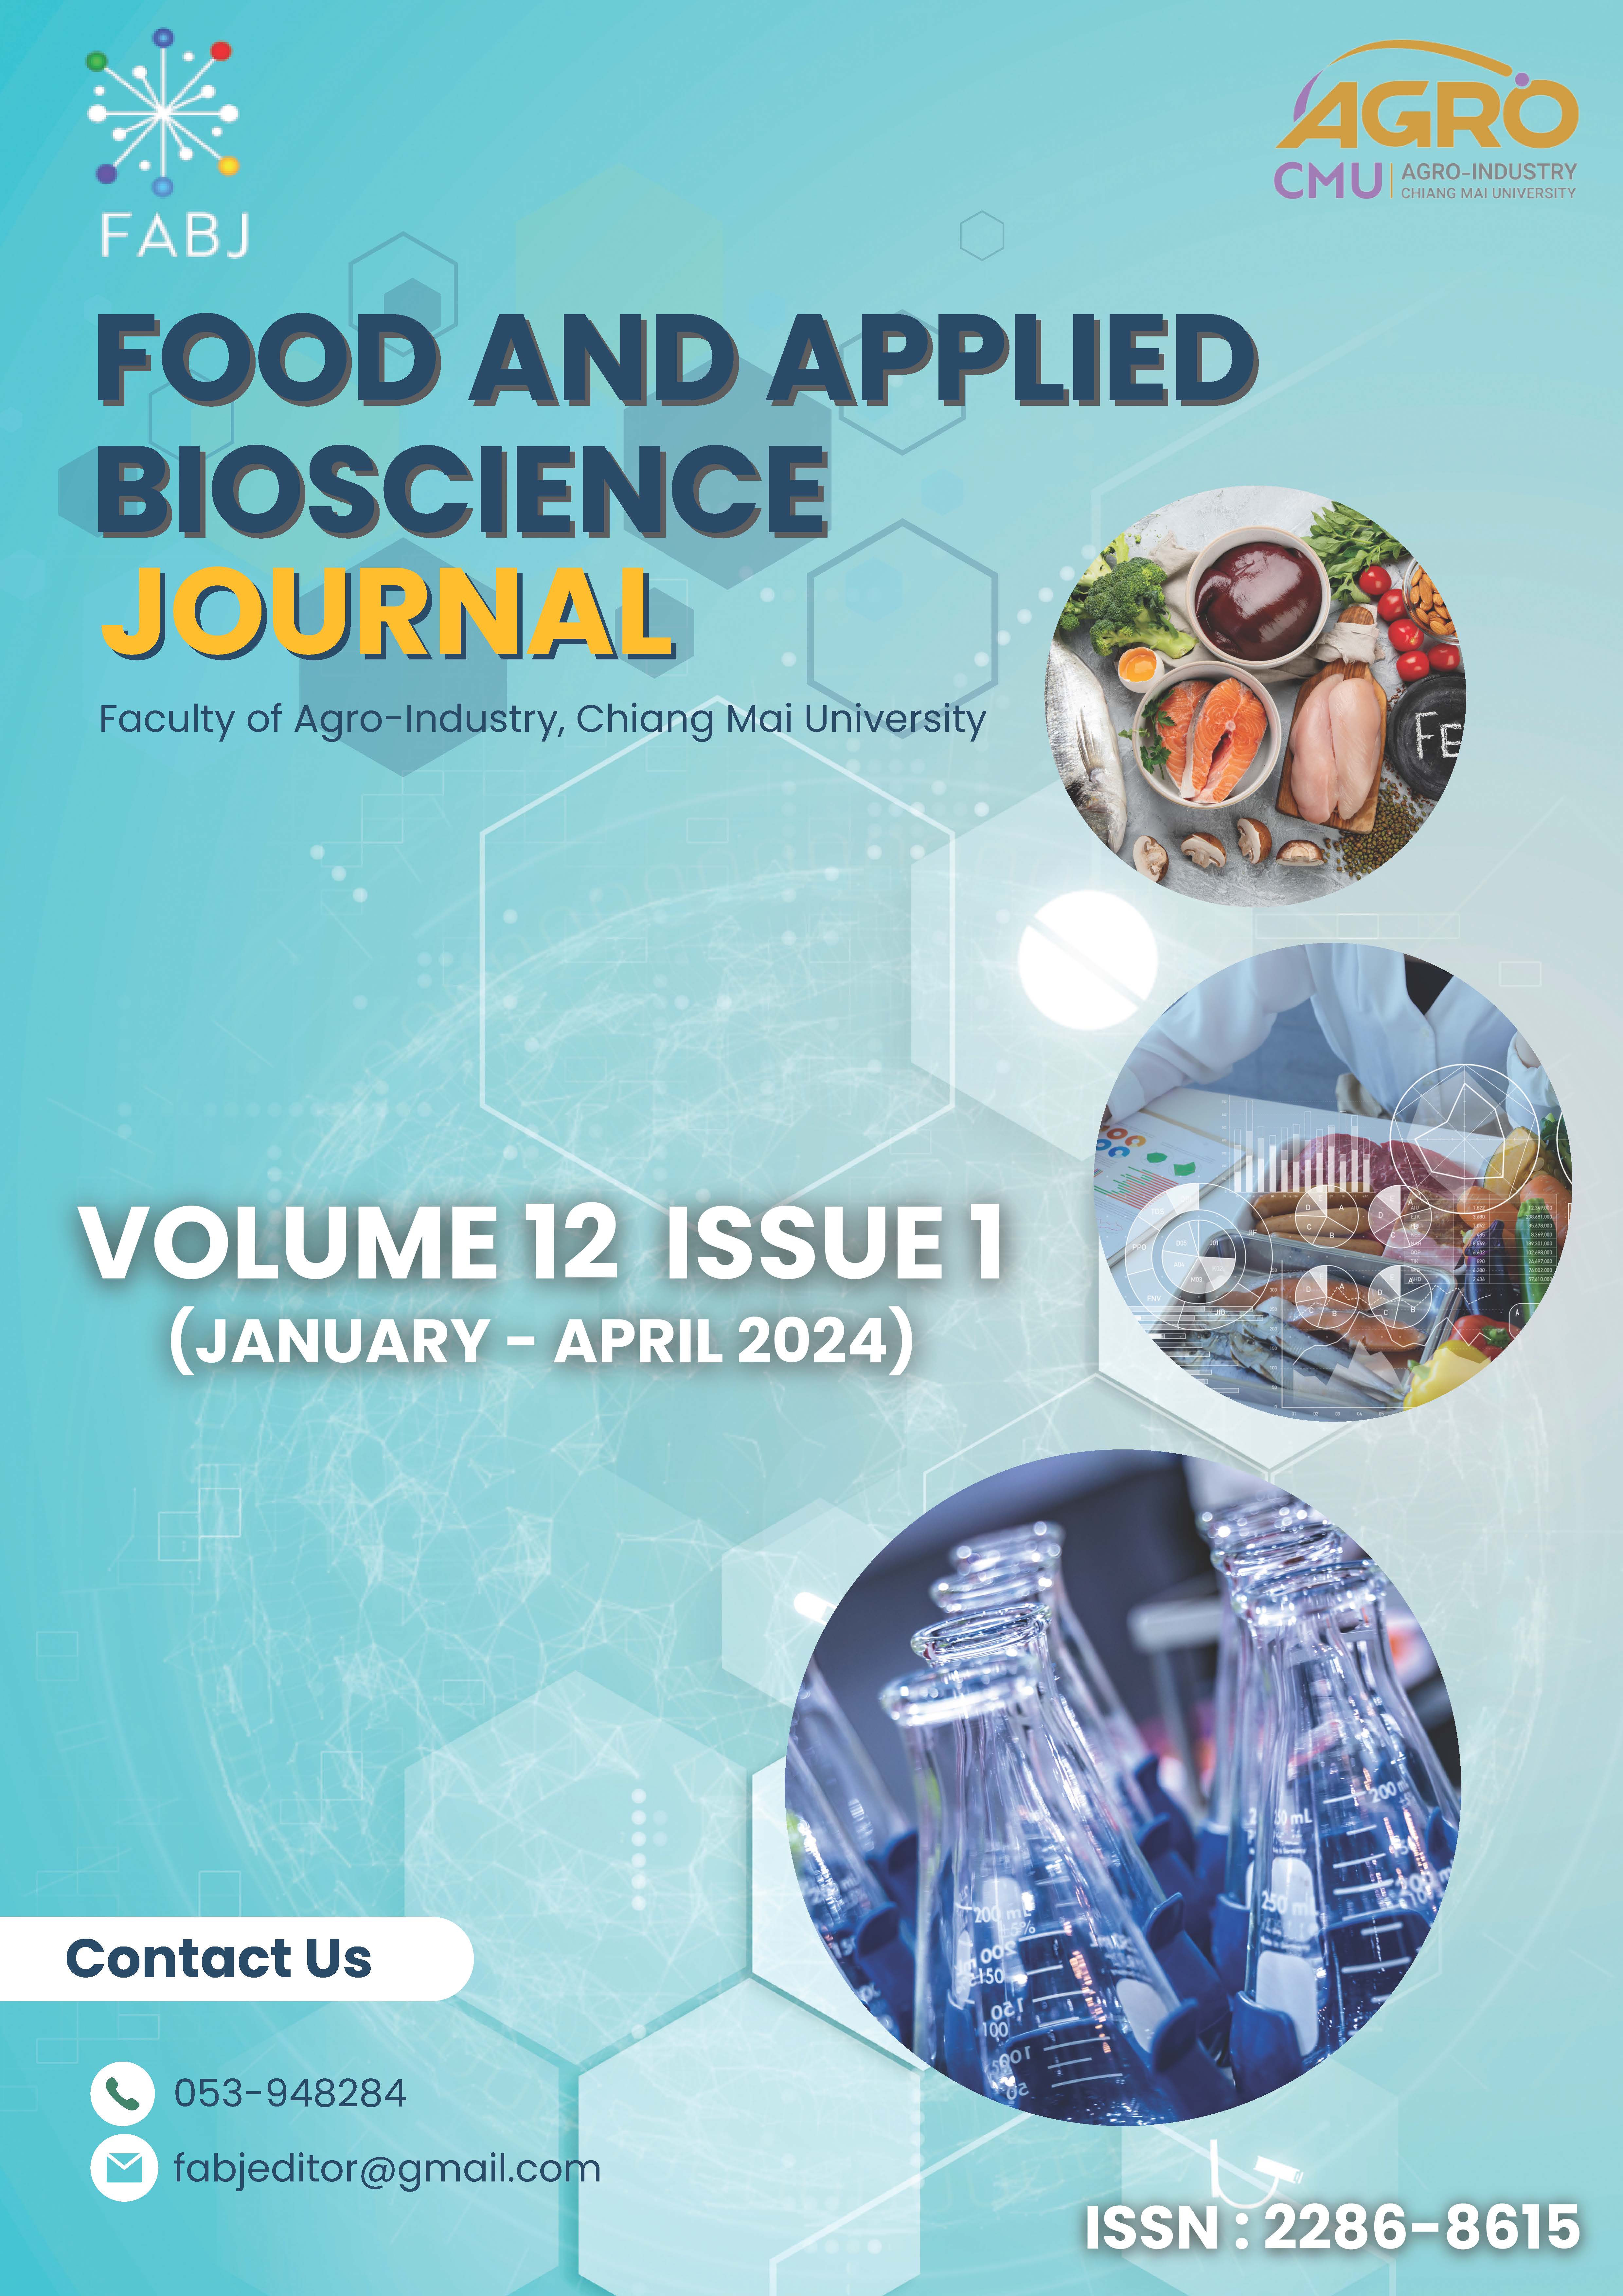 					View Vol. 12 No. 1 (2024): Food and Applied Bioscience Journal (January - April 2024)
				